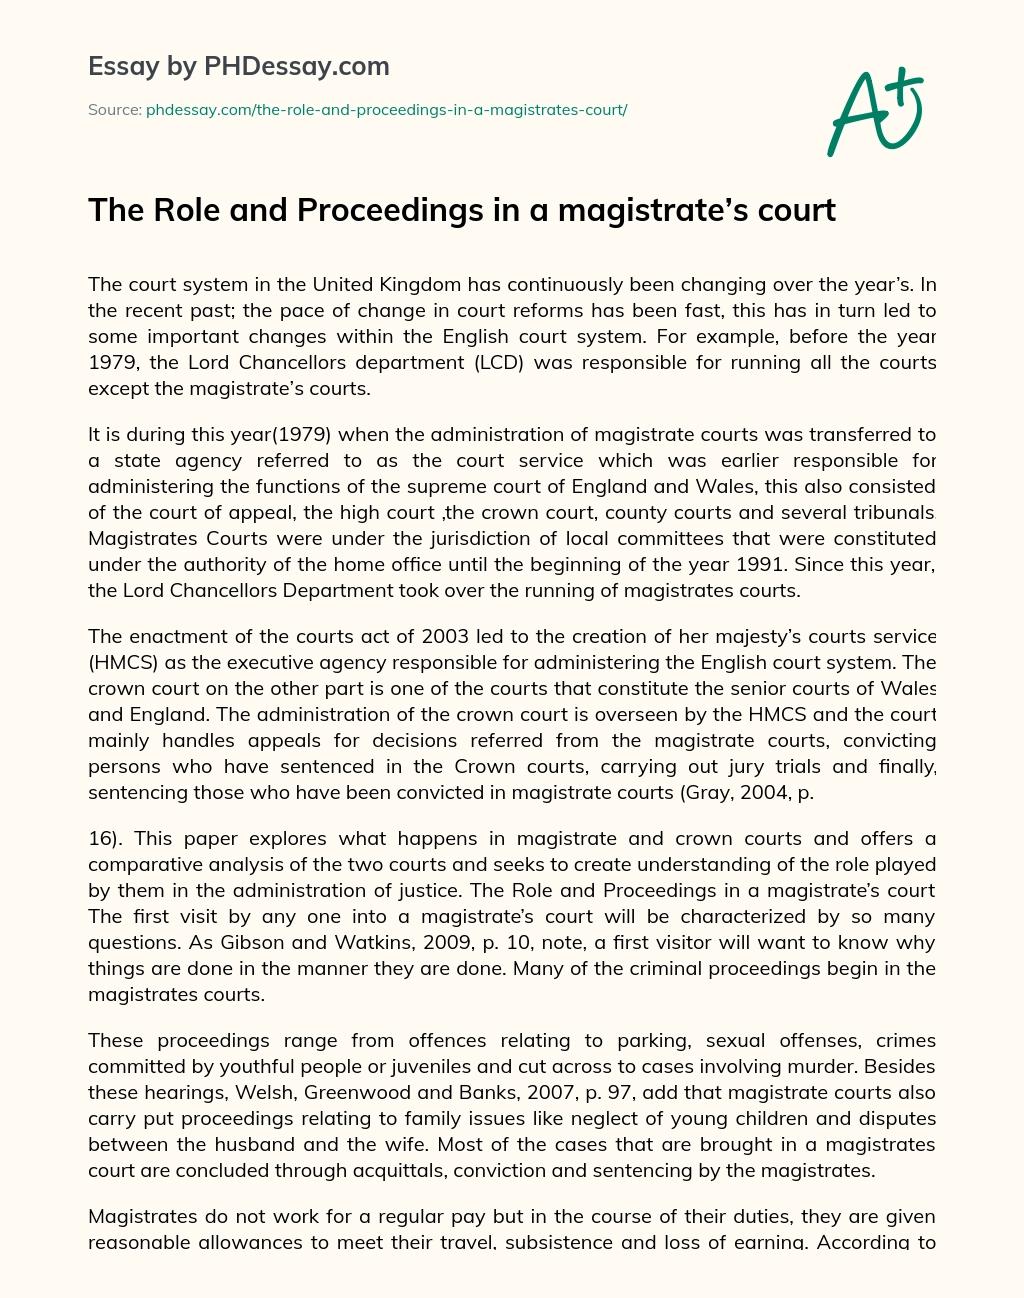 The Role and Proceedings in a magistrate’s court essay